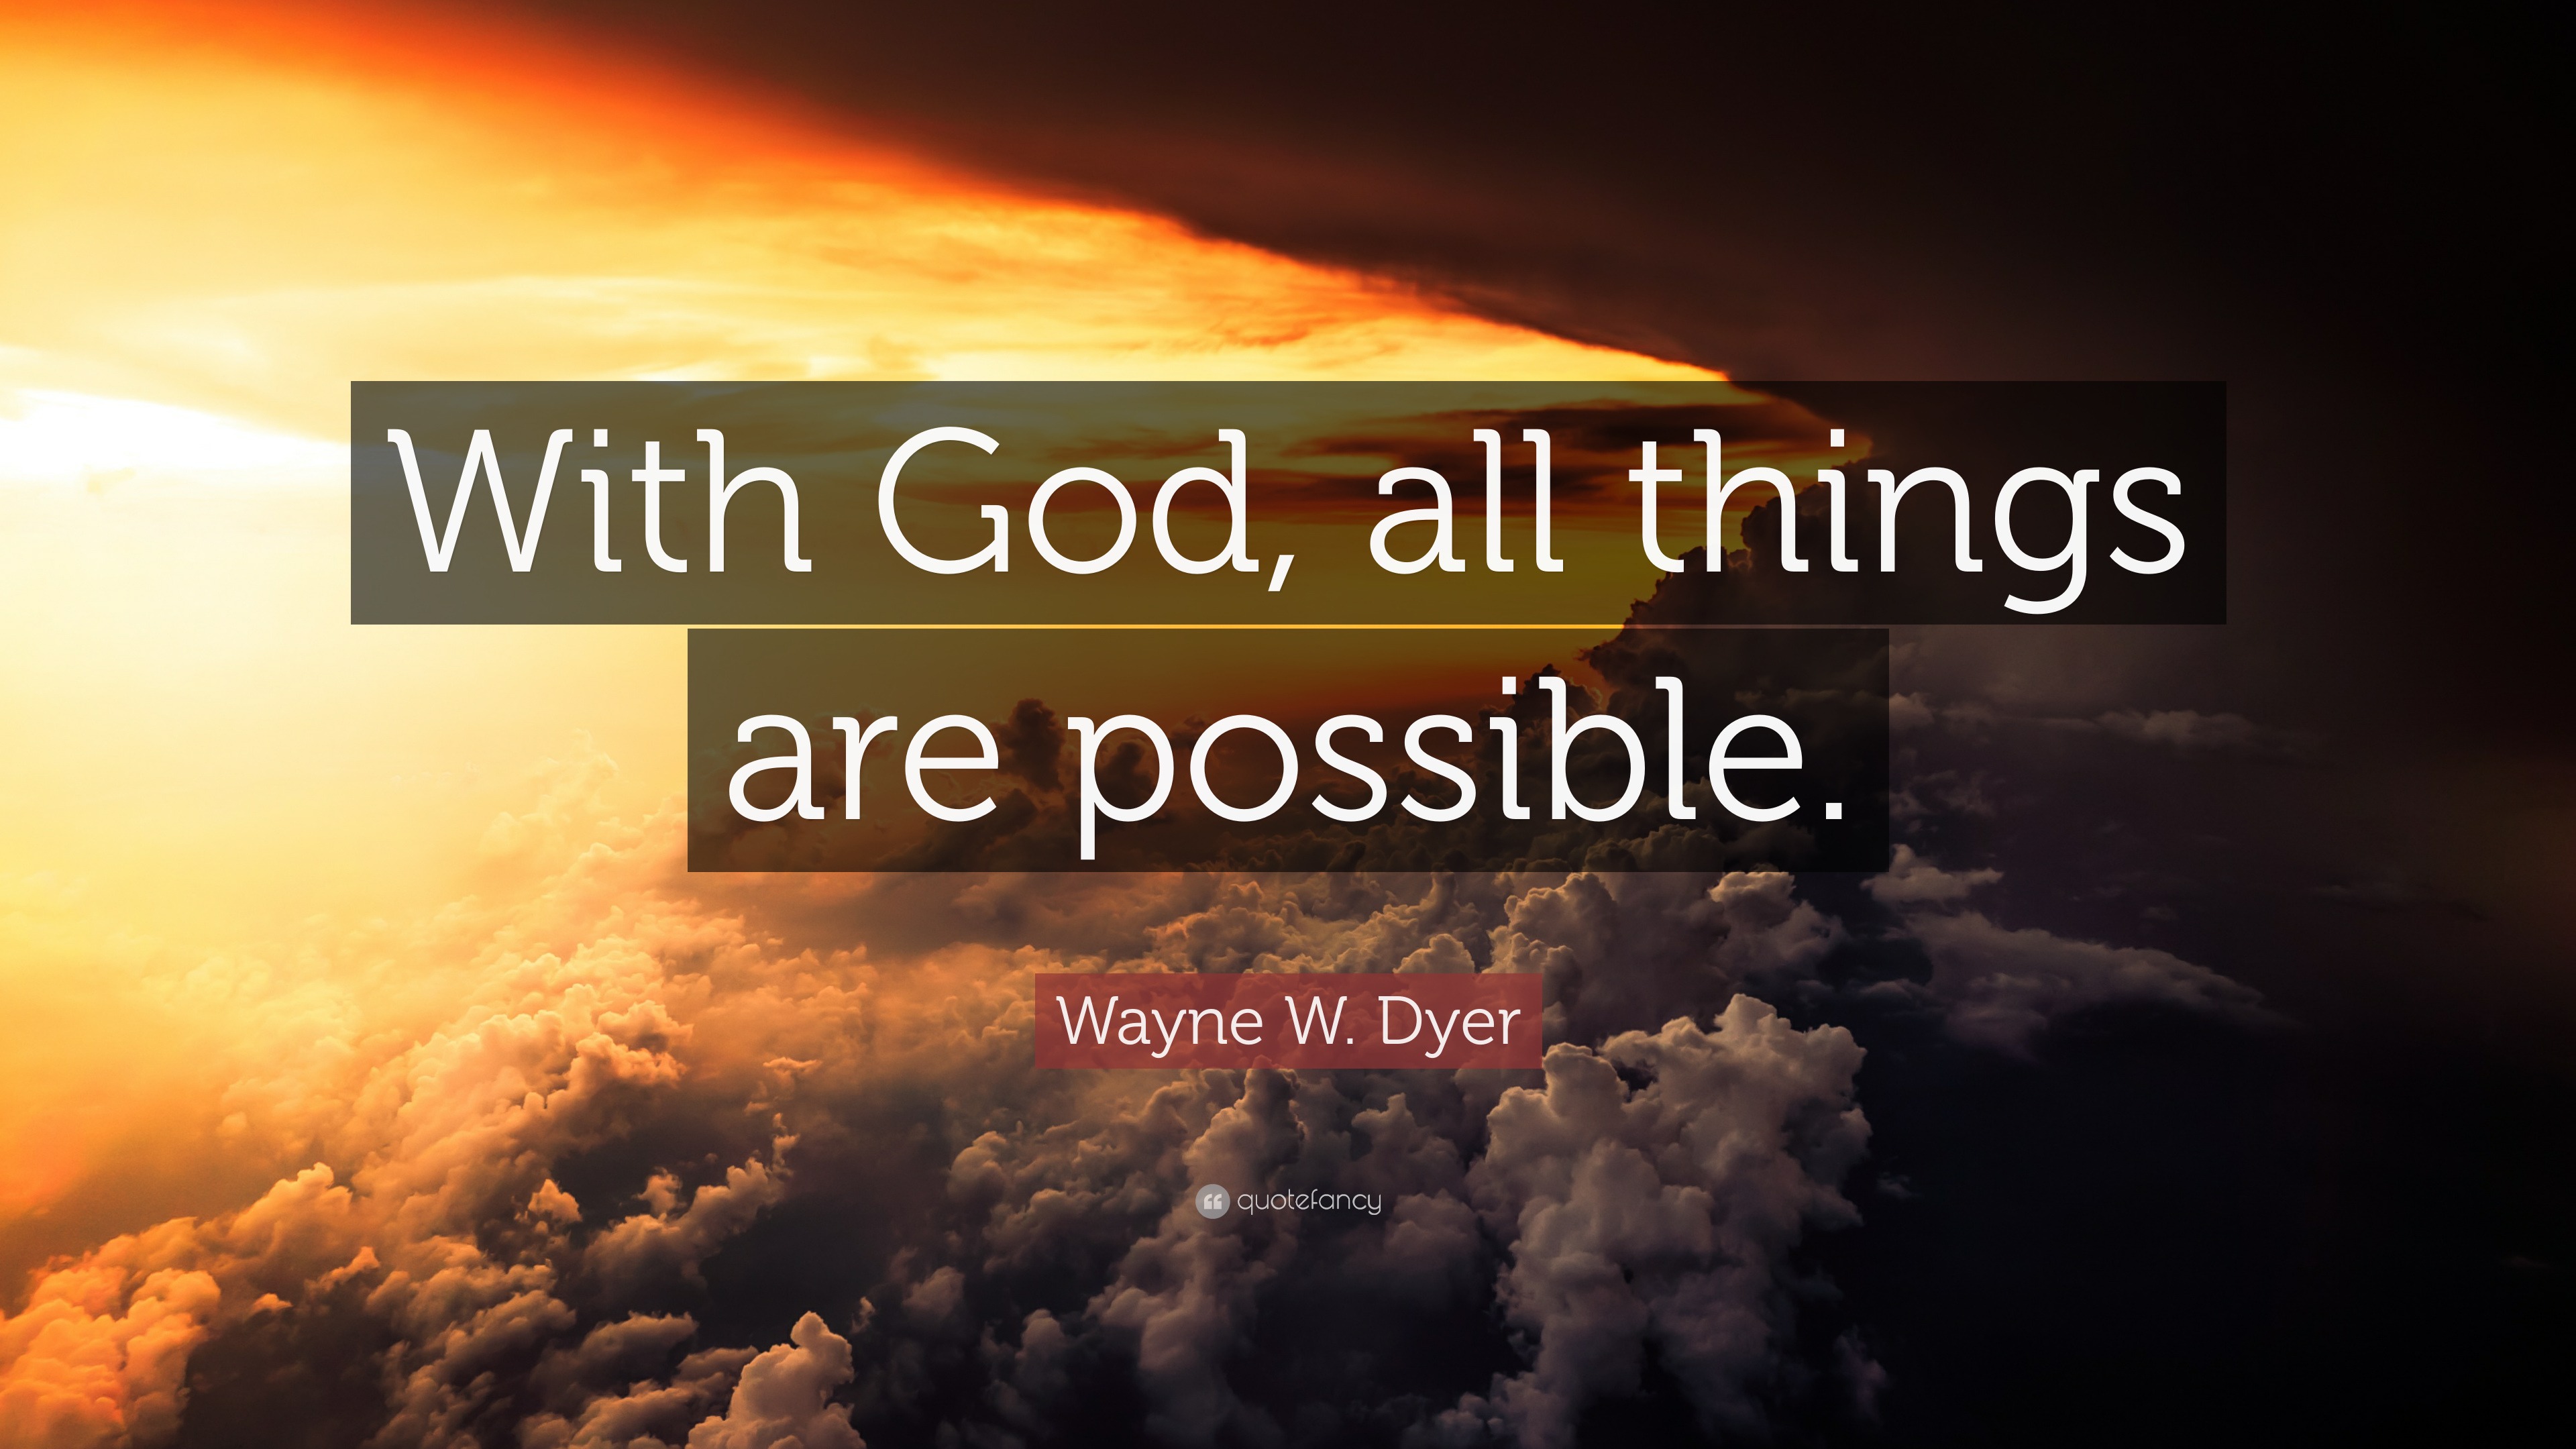 Wayne W. Dyer Quote: “With God, all things are possible.”